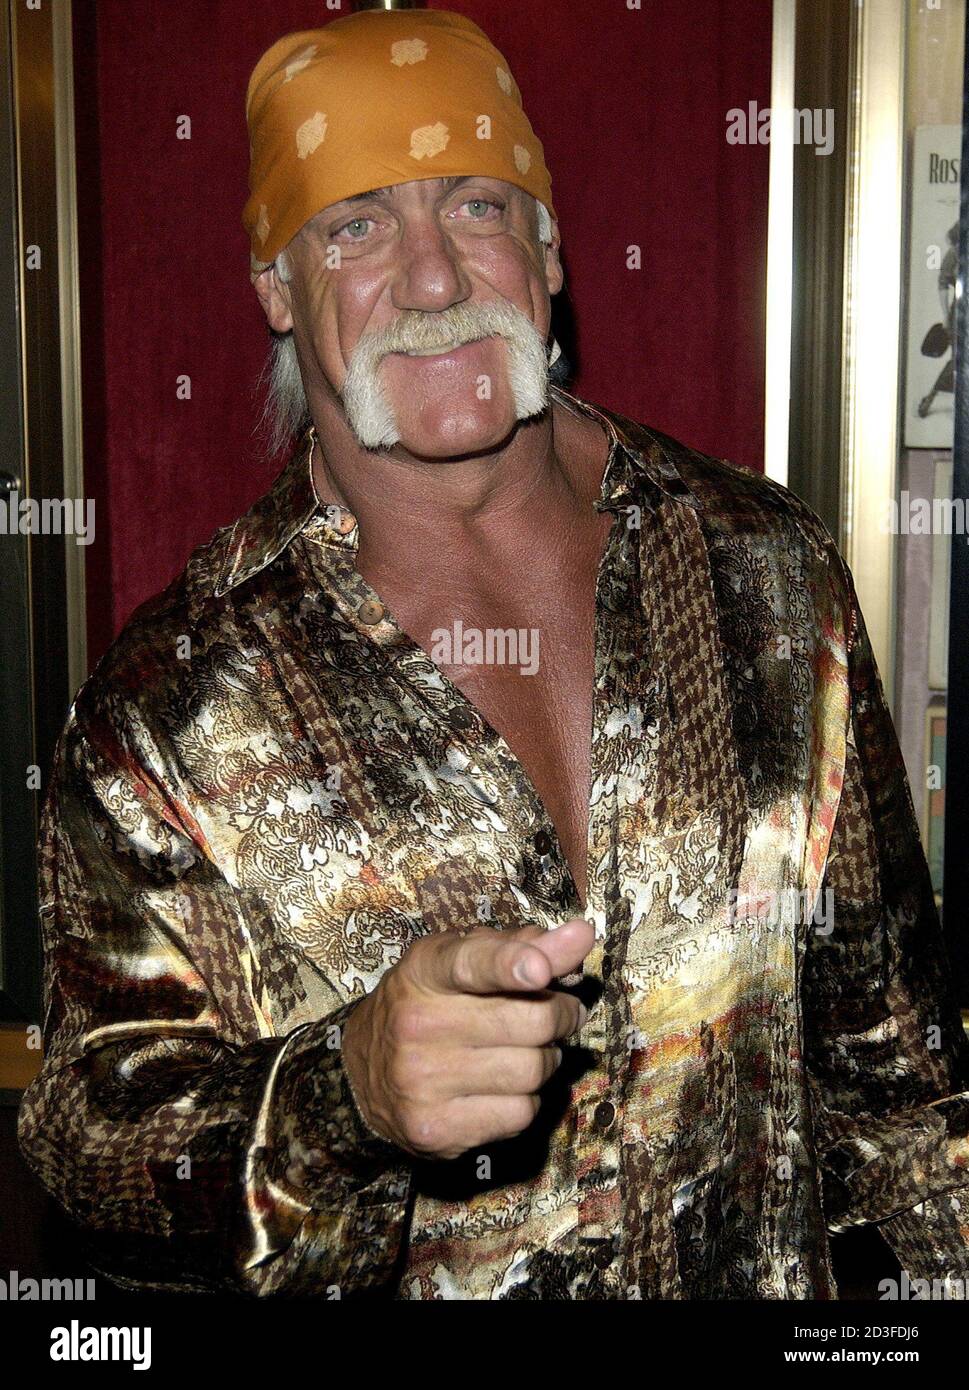 Wrestler and body builder Hulk Hogan poses for photographers after arriving for the US of the film "War of the Worlds," at the Zigfield Theatre in New York, June 23, 2005